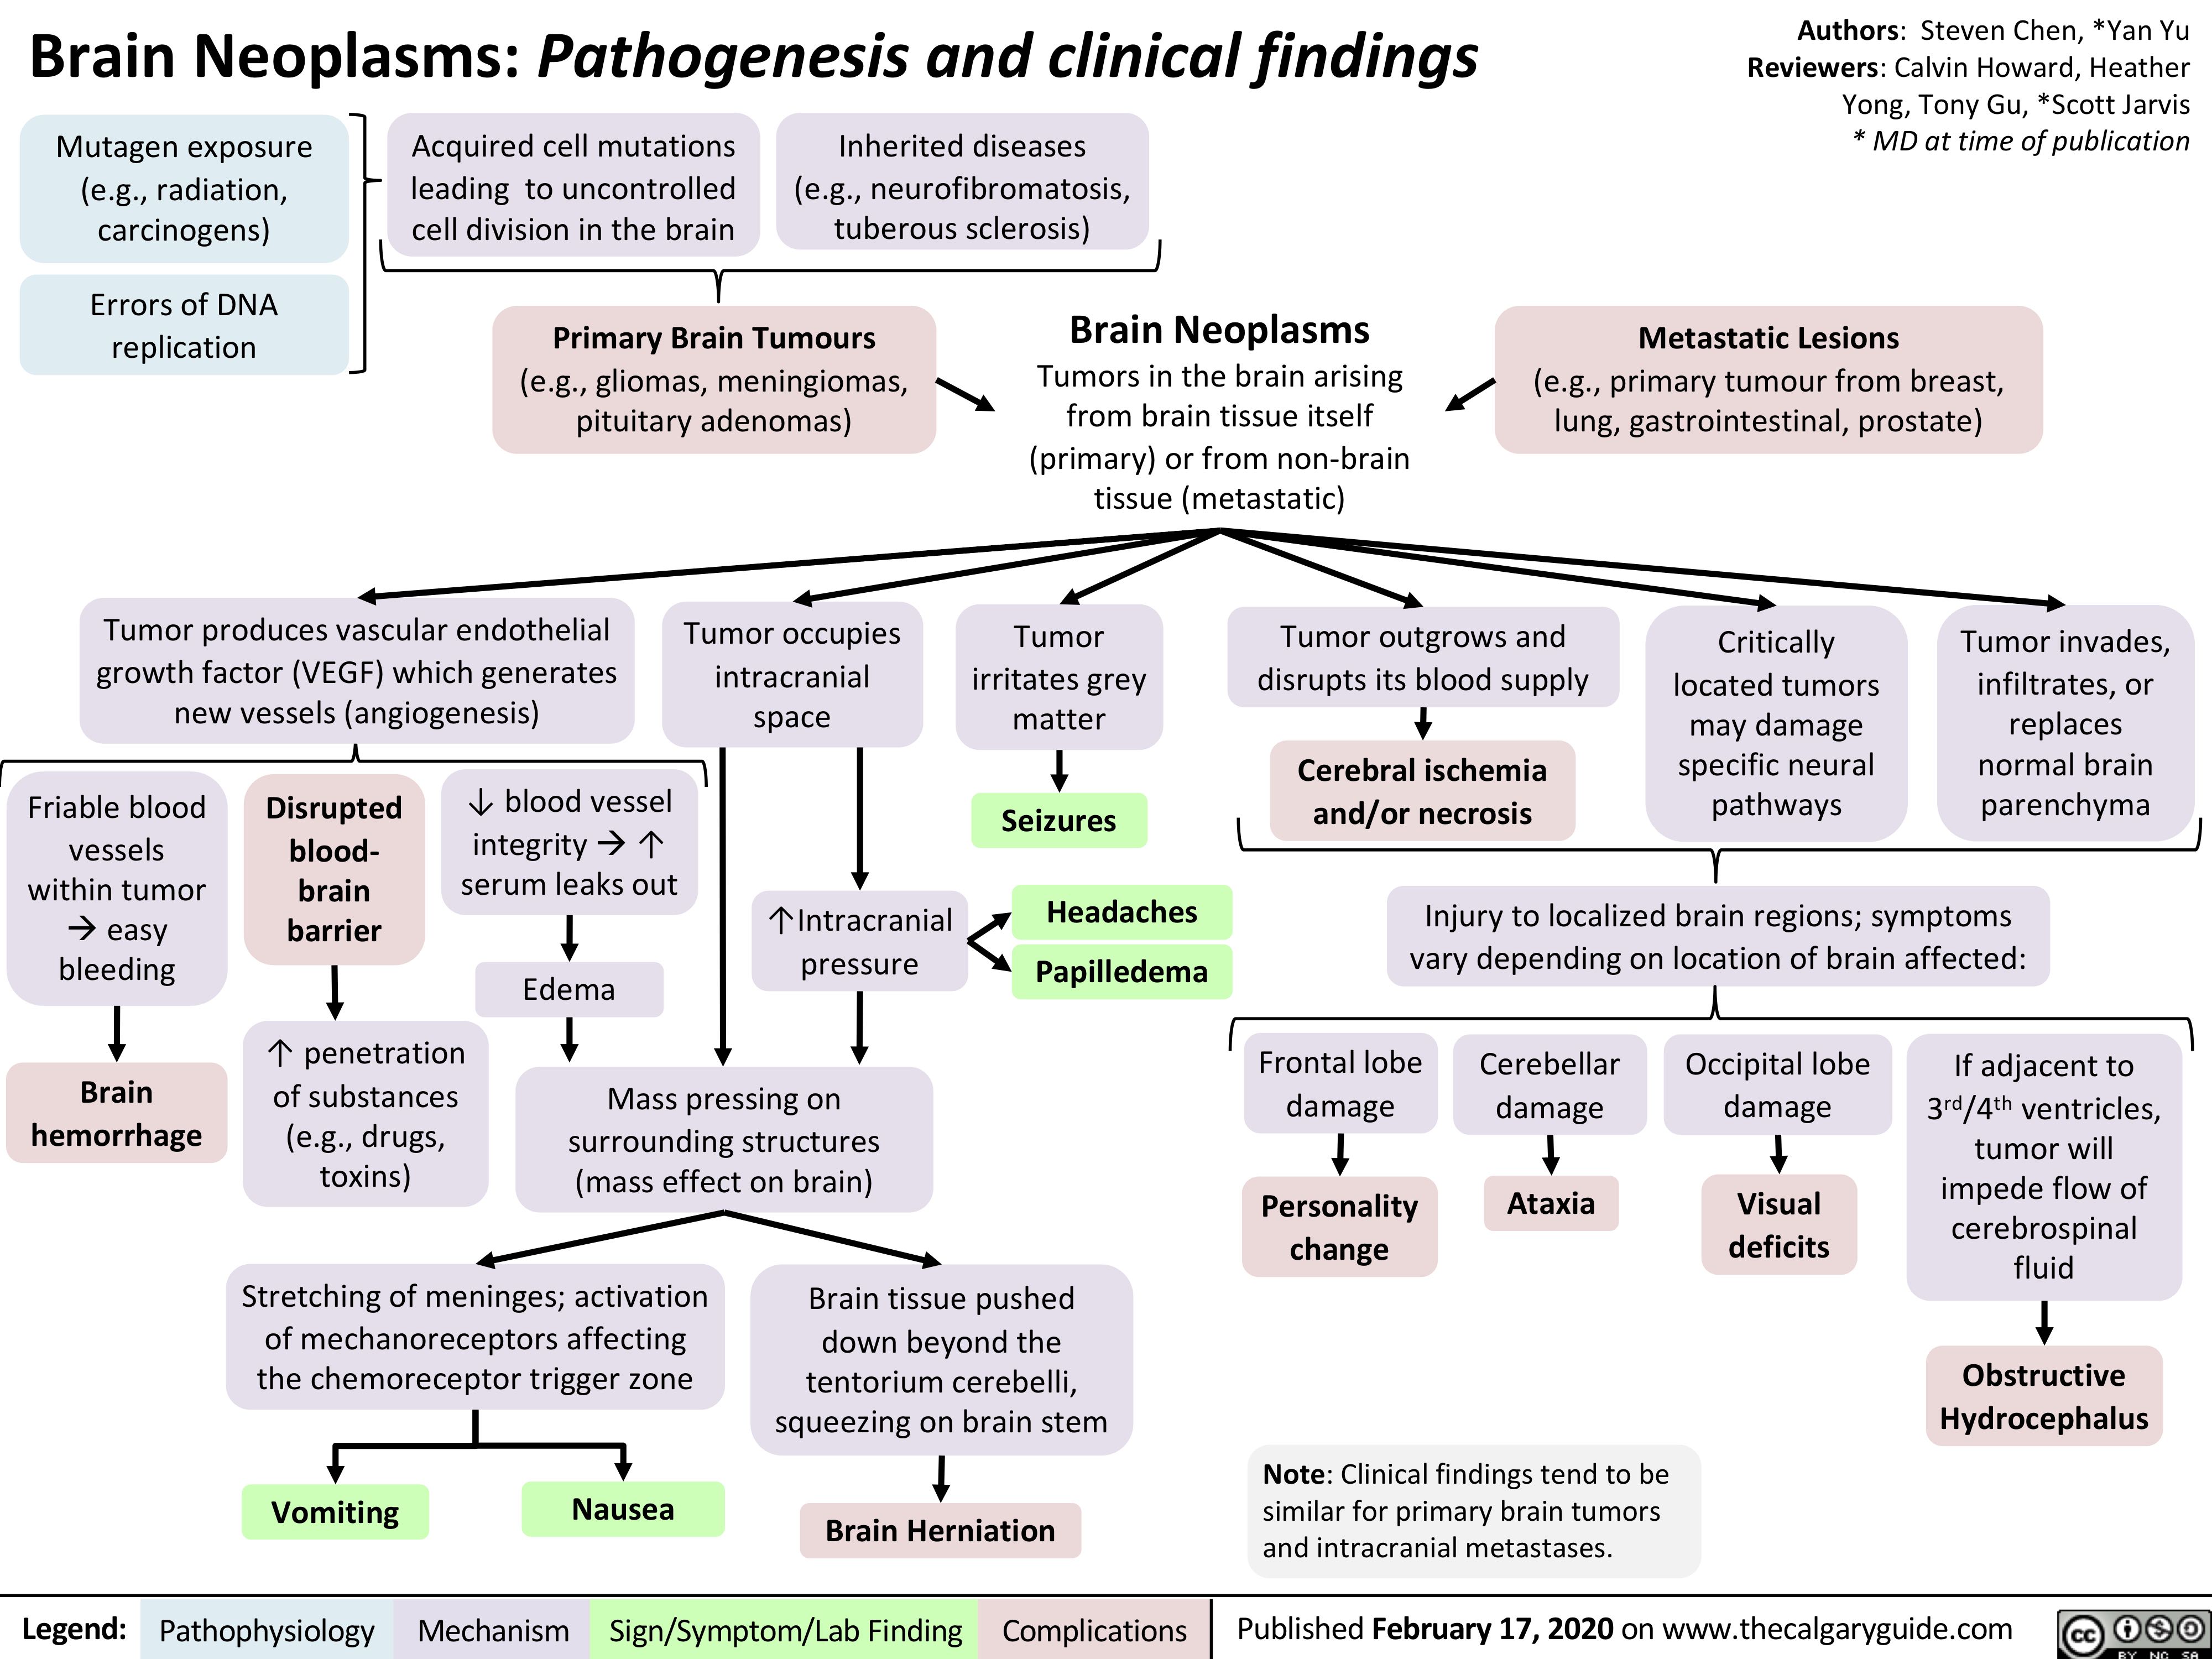 Brain Neoplasms: Pathogenesis and clinical findings
Authors: Steven Chen, *Yan Yu Reviewers: Calvin Howard, Heather Yong, Tony Gu, *Scott Jarvis * MD at time of publication
Metastatic Lesions
(e.g., primary tumour from breast, lung, gastrointestinal, prostate)
    Mutagen exposure (e.g., radiation, carcinogens)
Errors of DNA replication
Acquired cell mutations leading to uncontrolled cell division in the brain
Inherited diseases (e.g., neurofibromatosis, tuberous sclerosis)
    Primary Brain Tumours
(e.g., gliomas, meningiomas, pituitary adenomas)
Brain Neoplasms
Tumors in the brain arising from brain tissue itself (primary) or from non-brain tissue (metastatic)
              Tumor produces vascular endothelial growth factor (VEGF) which generates new vessels (angiogenesis)
Tumor occupies intracranial space
↑Intracranial pressure
Tumor irritates grey matter
Seizures
Headaches Papilledema
Tumor outgrows and disrupts its blood supply
Cerebral ischemia and/or necrosis
Critically located tumors may damage specific neural pathways
Tumor invades, infiltrates, or replaces normal brain parenchyma
        Friable blood vessels within tumor àeasy bleeding
Brain hemorrhage
Disrupted blood- brain barrier
↓ blood vessel integrity à ↑ serum leaks out
Edema
Injury to localized brain regions; symptoms vary depending on location of brain affected:
                ↑ penetration of substances
(e.g., drugs, toxins)
Mass pressing on surrounding structures (mass effect on brain)
Frontal lobe damage
Personality change
Cerebellar damage
Ataxia
Occipital lobe damage
Visual deficits
If adjacent to 3rd/4th ventricles,
tumor will impede flow of cerebrospinal fluid
Obstructive Hydrocephalus
                Stretching of meninges; activation of mechanoreceptors affecting the chemoreceptor trigger zone
Vomiting Nausea
Brain tissue pushed down beyond the
tentorium cerebelli, squeezing on brain stem
Brain Herniation
Note: Clinical findings tend to be similar for primary brain tumors and intracranial metastases.
         Legend:
 Pathophysiology
Mechanism
Sign/Symptom/Lab Finding
  Complications
Published February 17, 2020 on www.thecalgaryguide.com
    